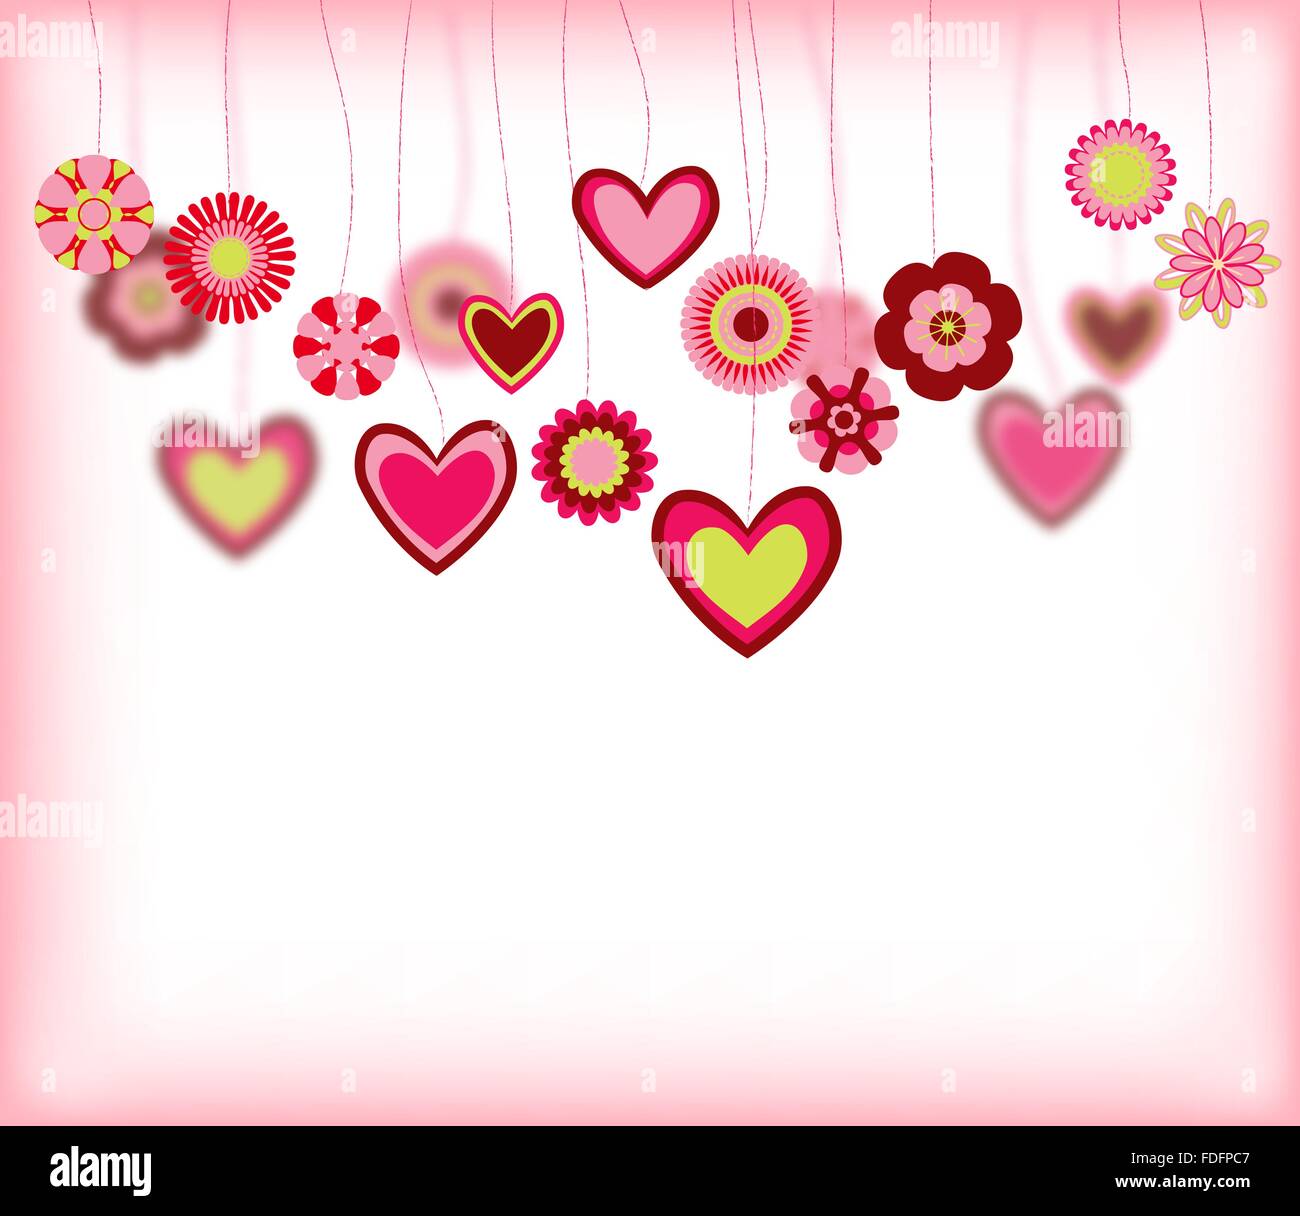 flowers with heart shapes hanging. abstract retro love greeting card. vector Stock Vector